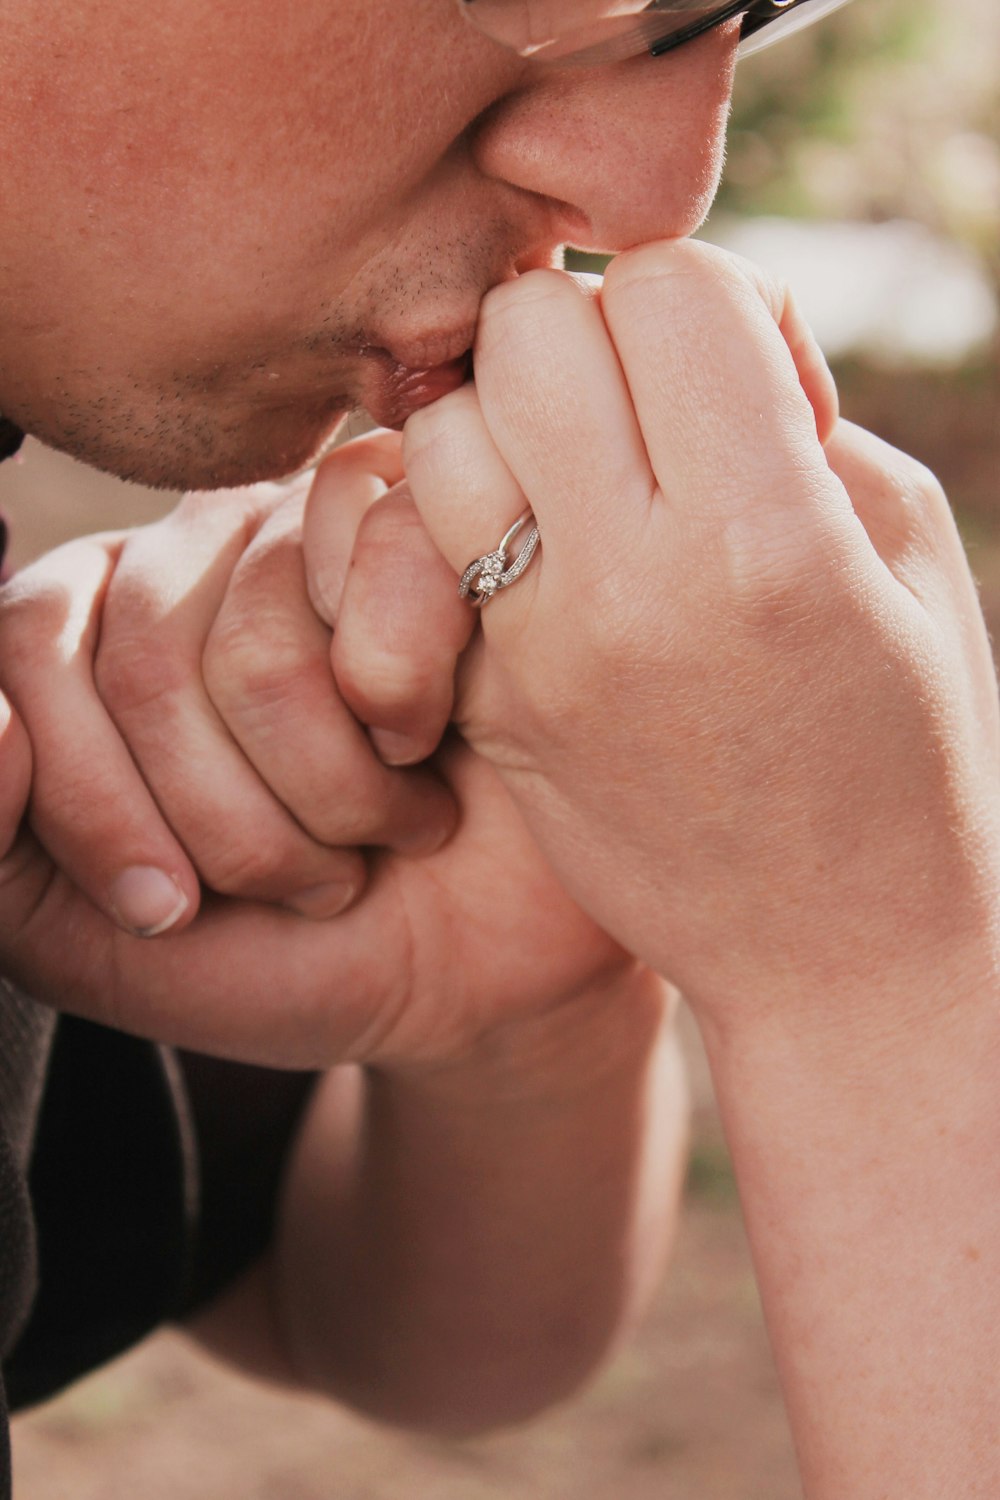 closed up photo of person kissing hand